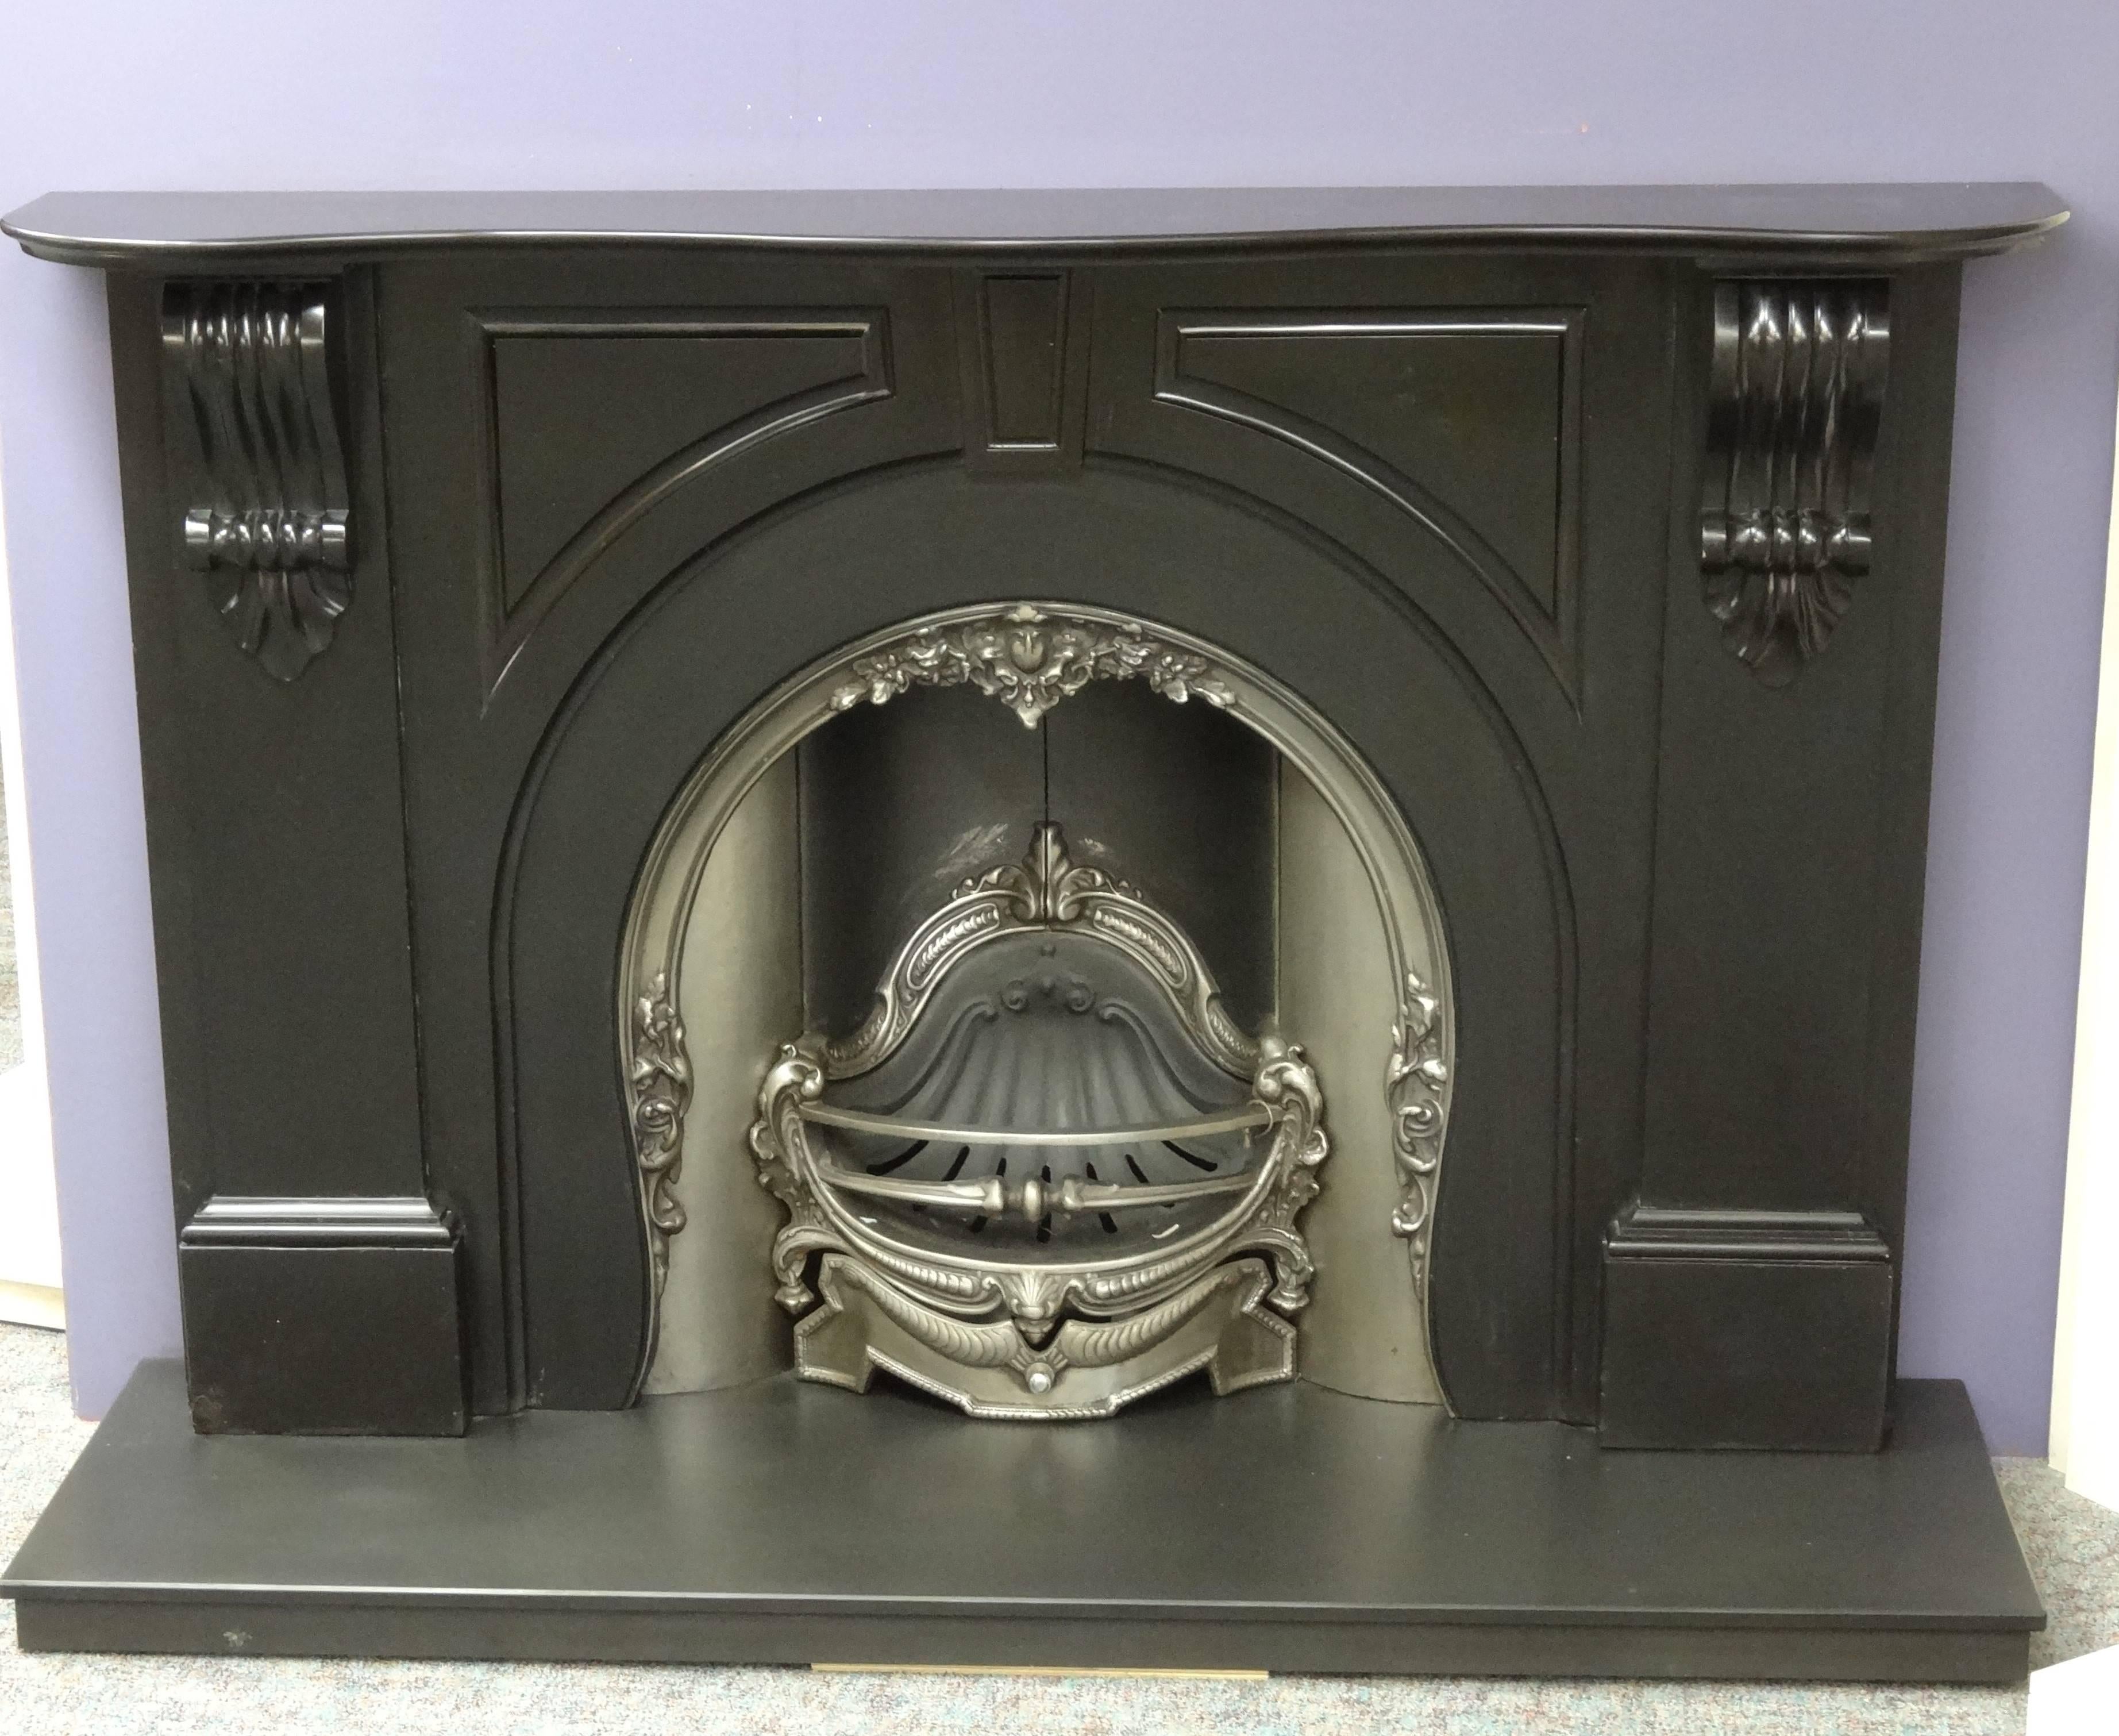 Reclaimed Victorian glazed black marble fireplace surround. The fireplace an arched aperture, fluted corbels and panels, center keystone, serpentine mantel.

External Measurements:
Mantel width 72.75 inches / 184.7 cm
Mantel depth 13 inches / 33